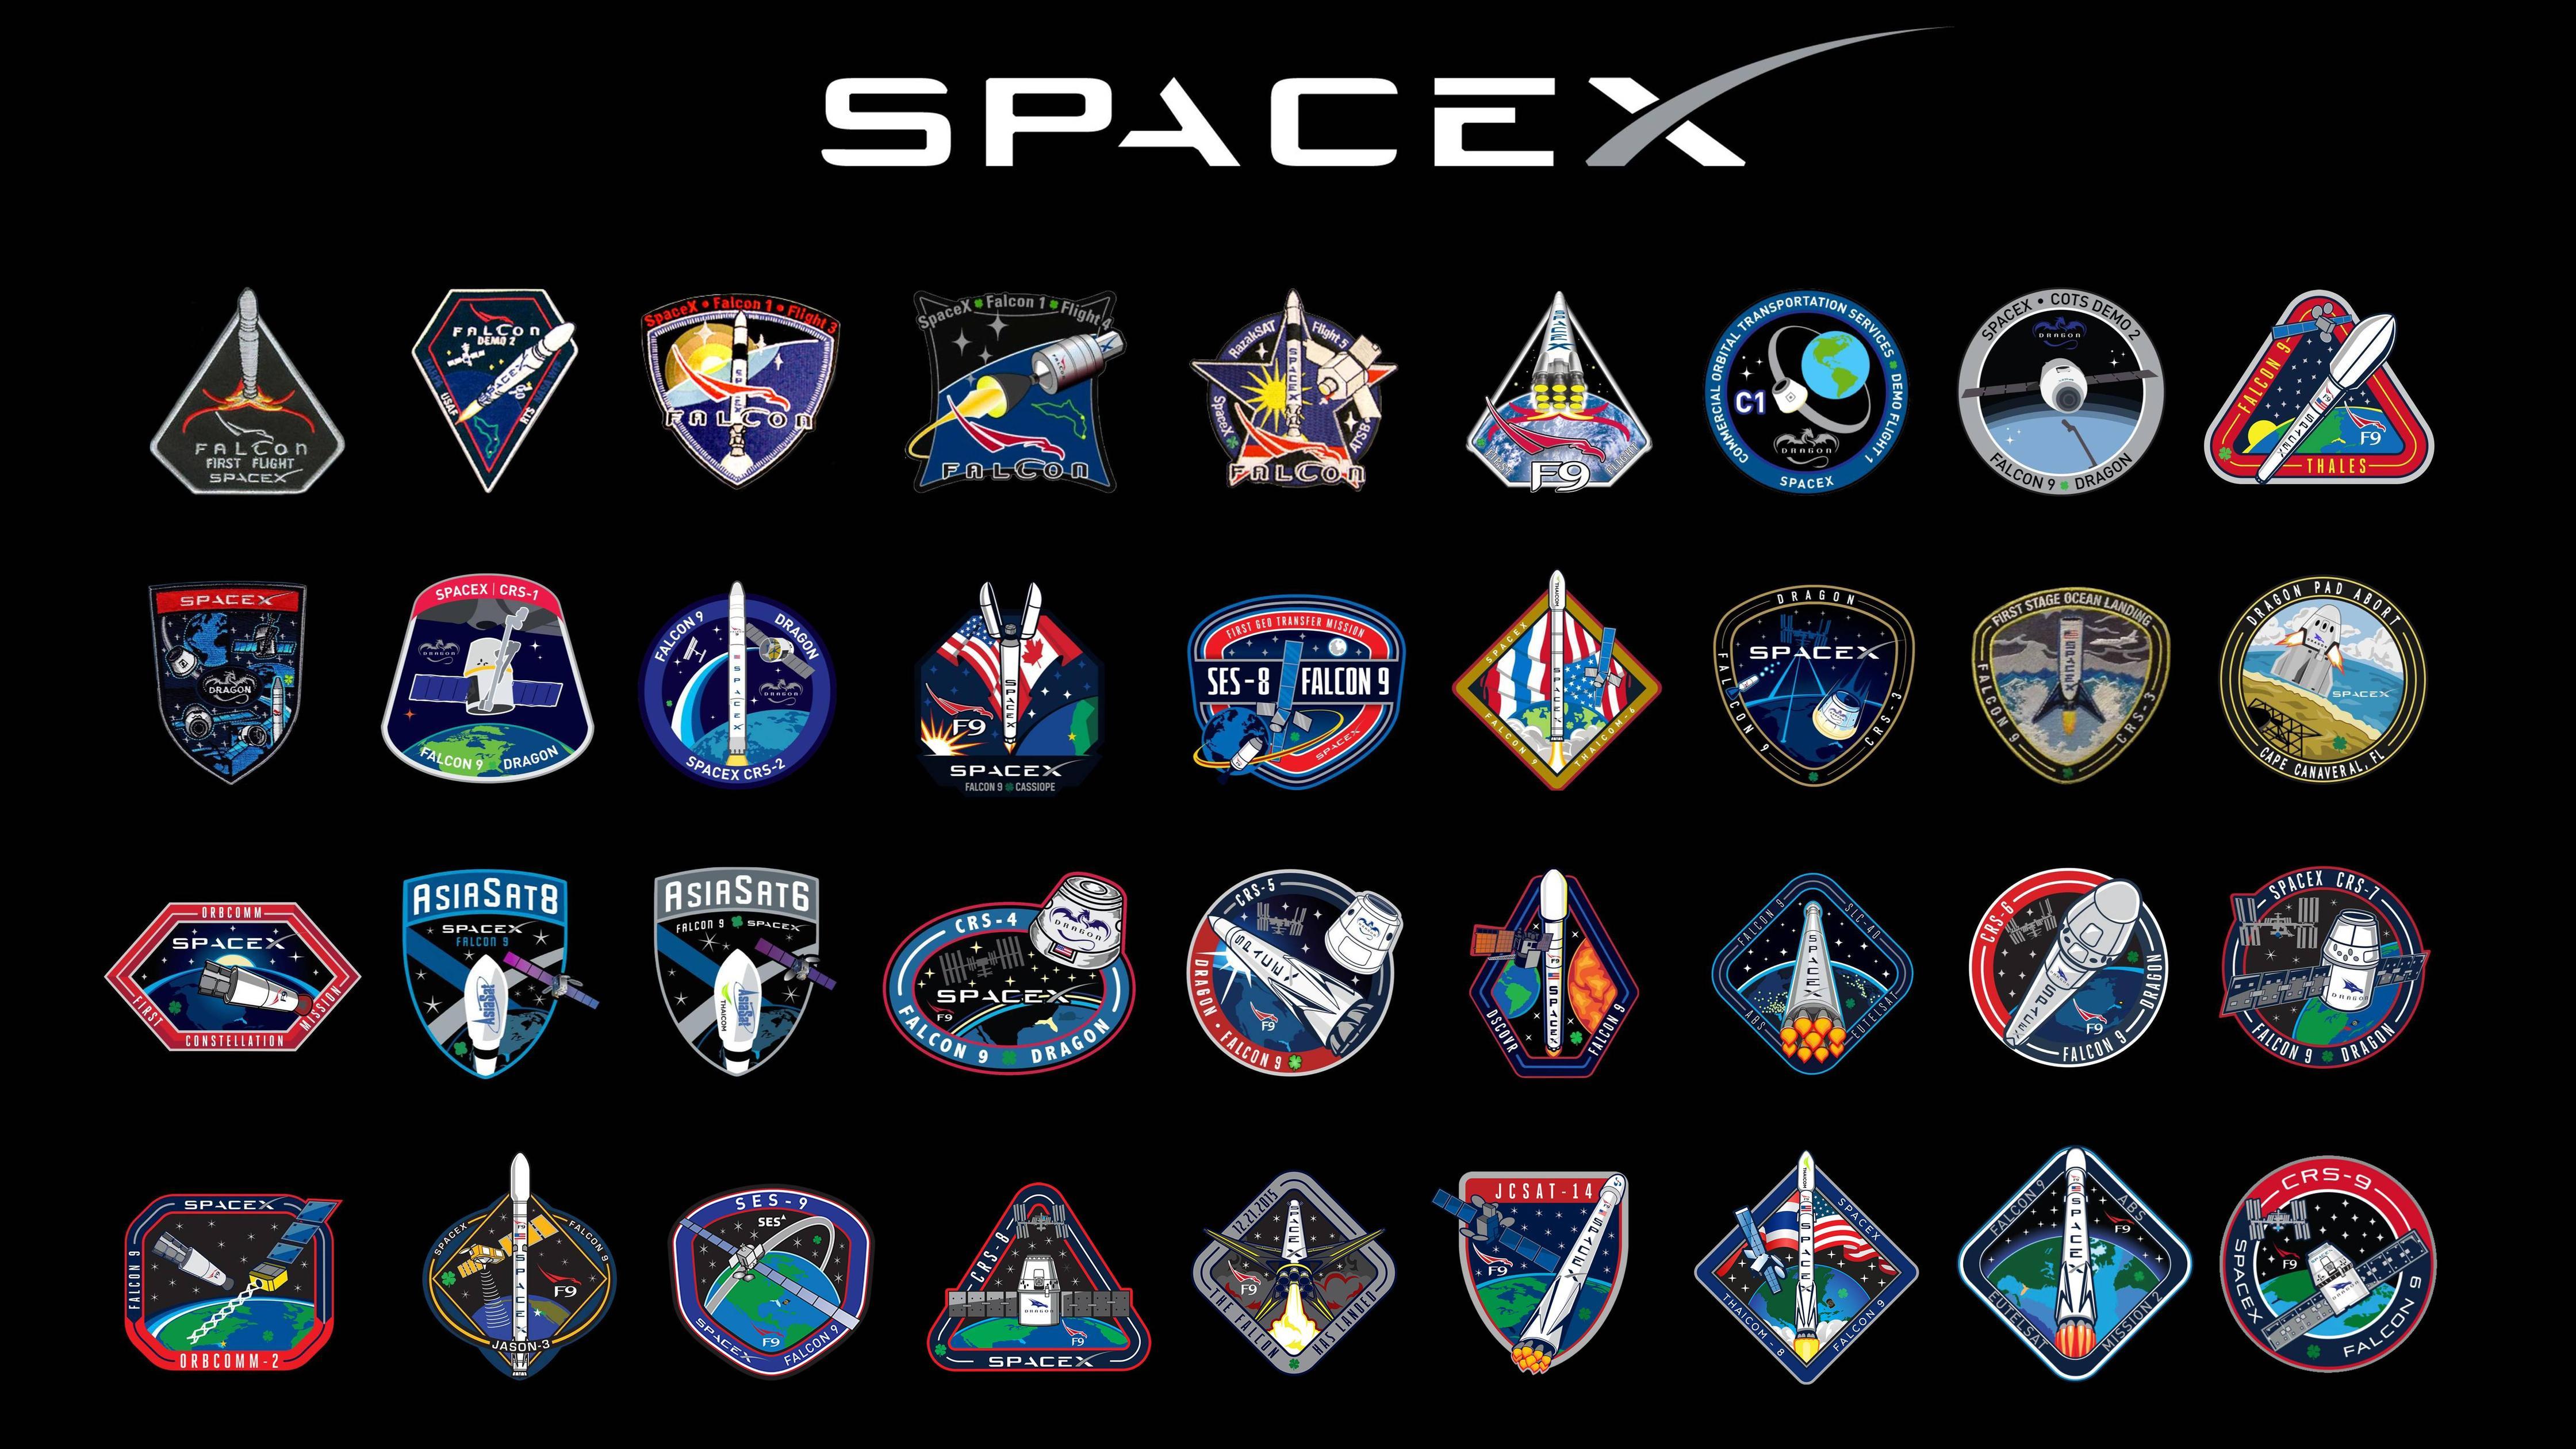 Falcon 9 Logo - SpaceX Mission Patch 16:9 Wallpaper